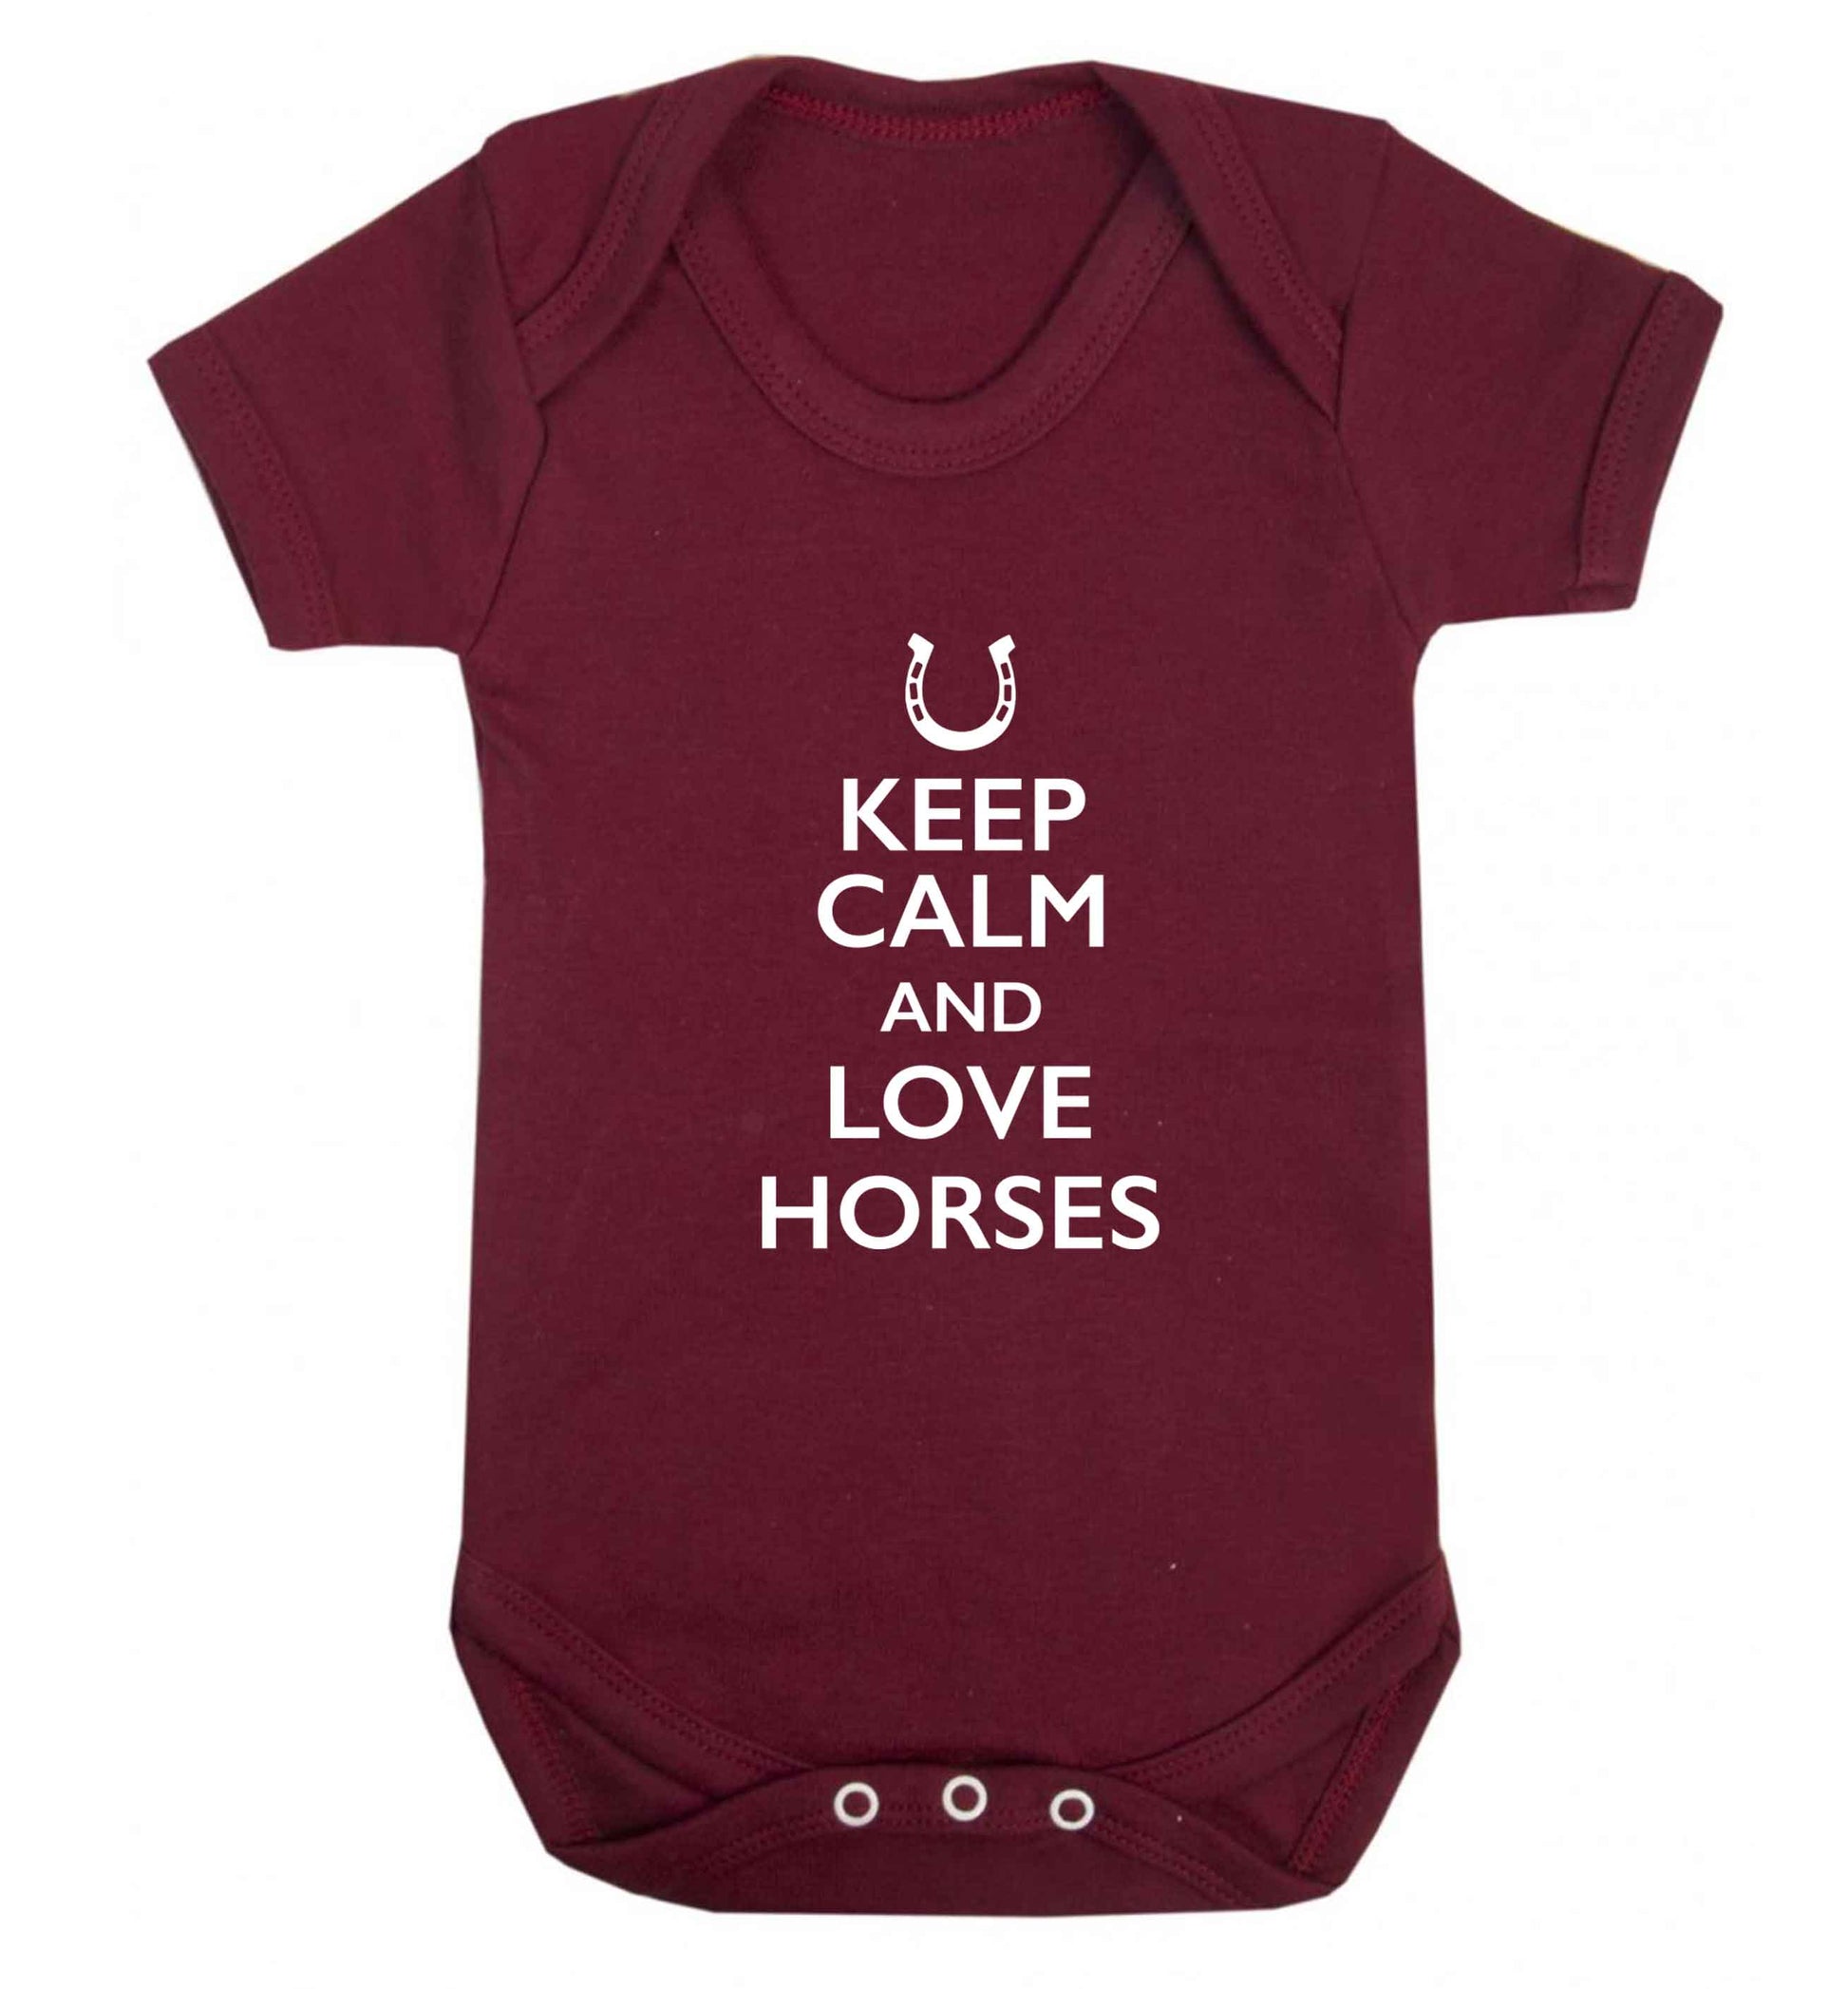 Keep calm and love horses baby vest maroon 18-24 months